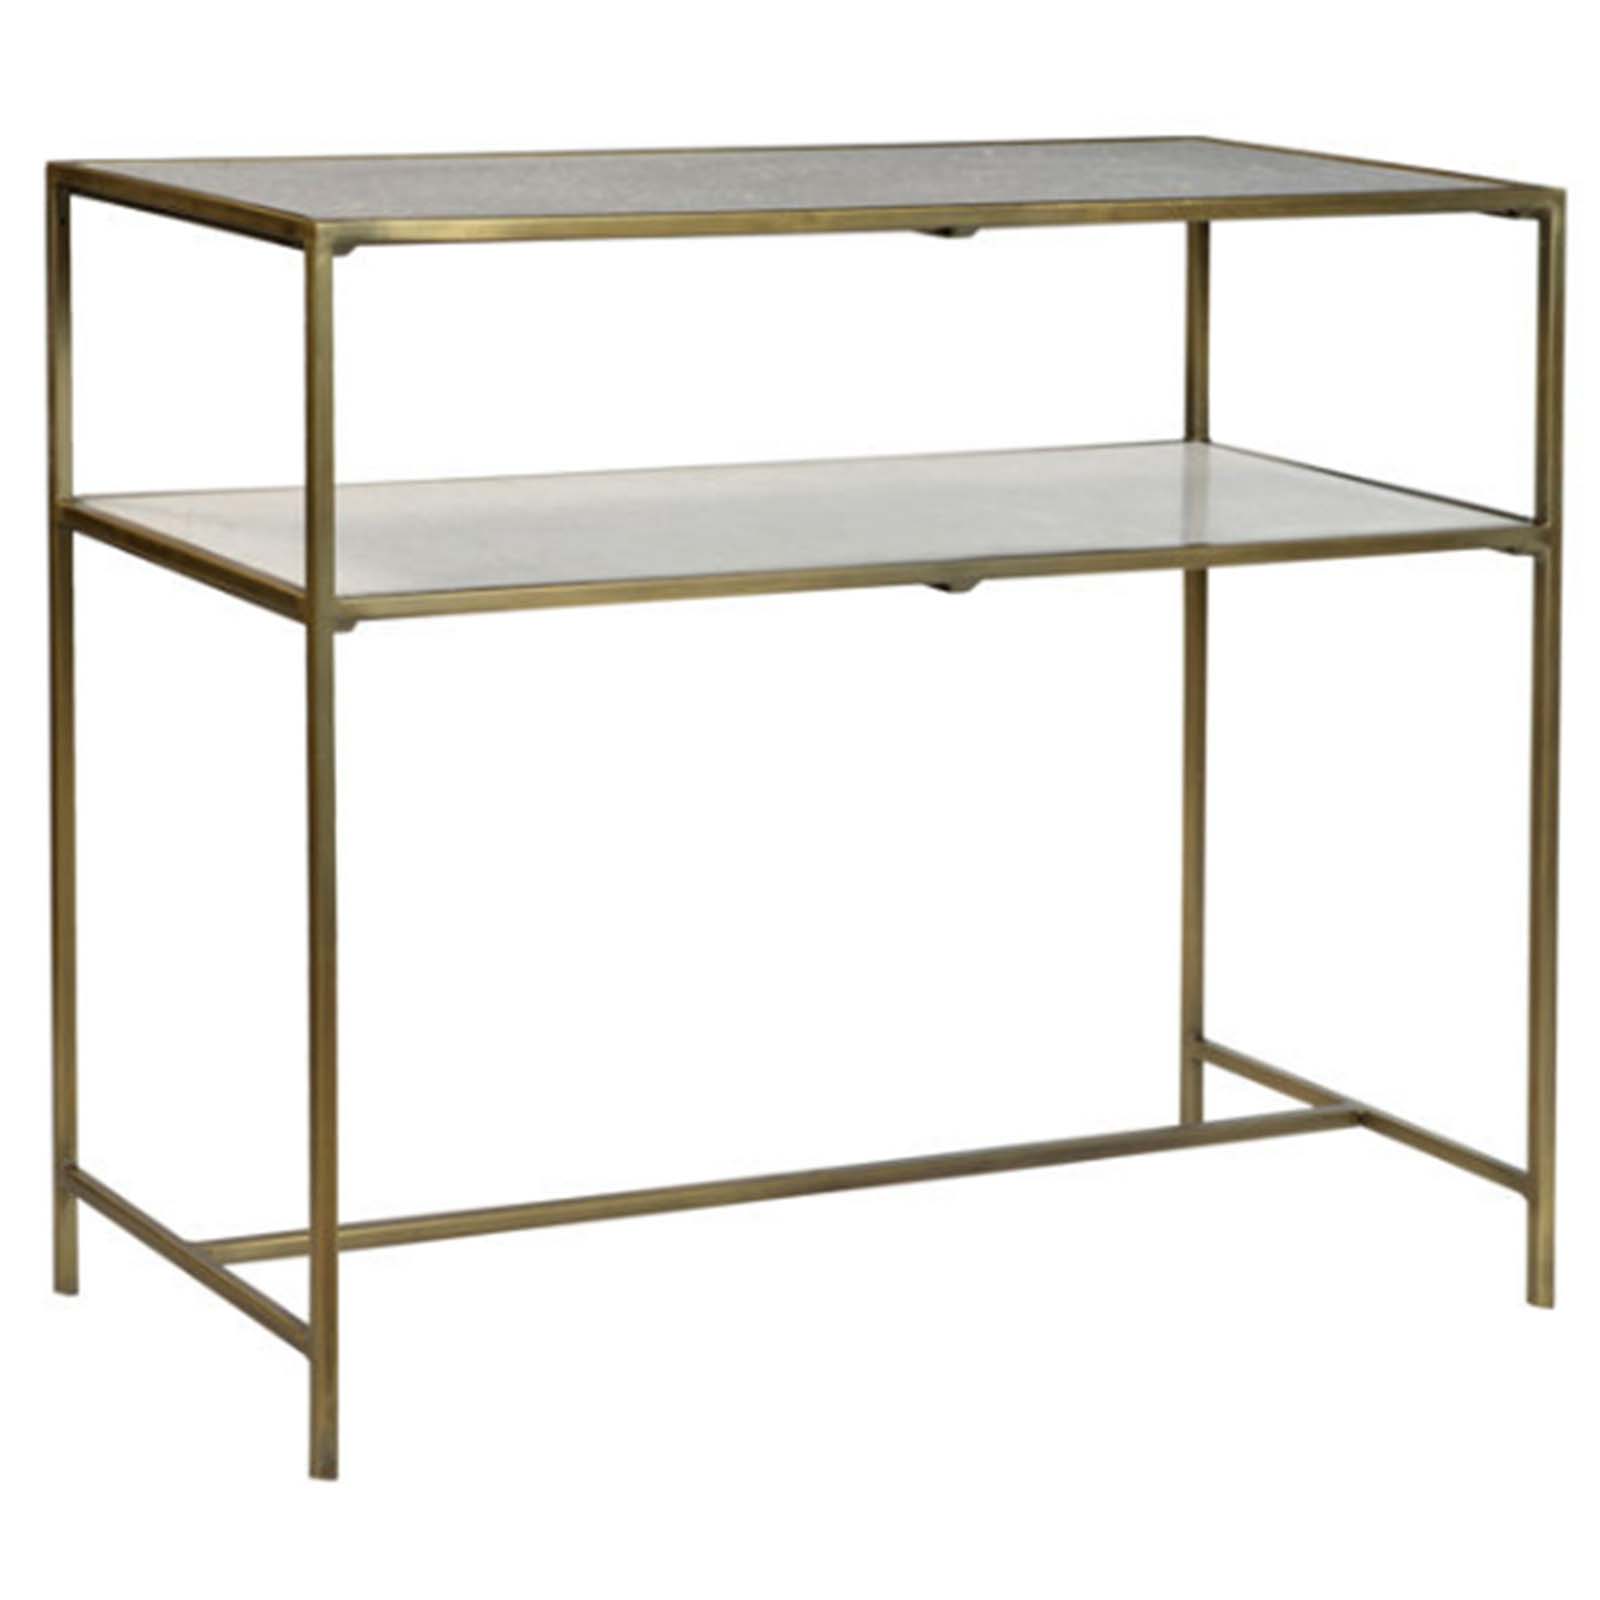 Trystan 44" Console Table